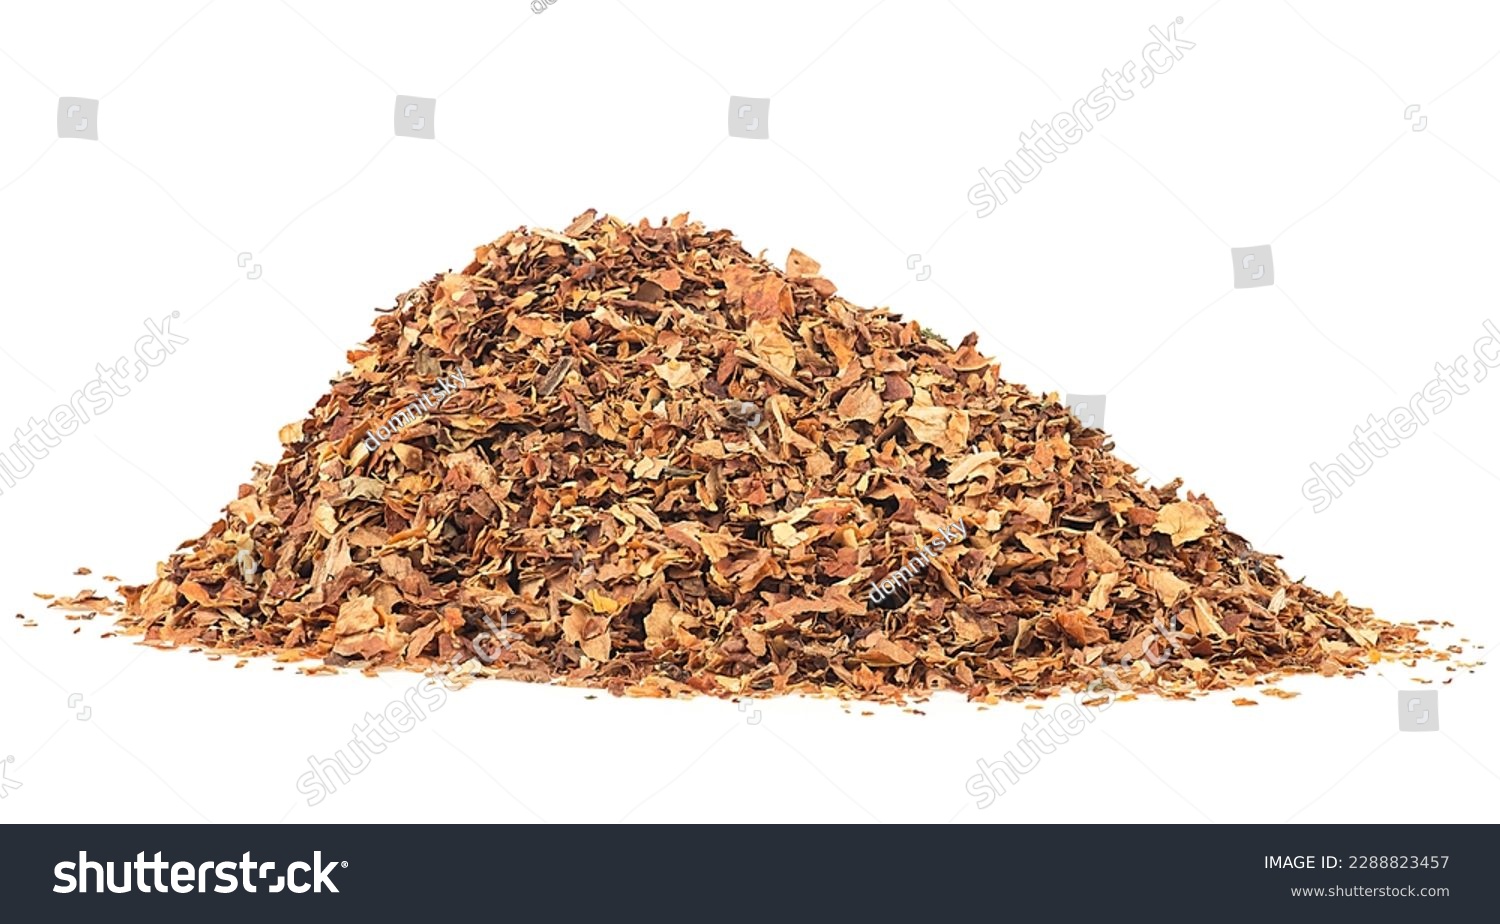 Dried smoking tobacco pile isolated on a white background #2288823457